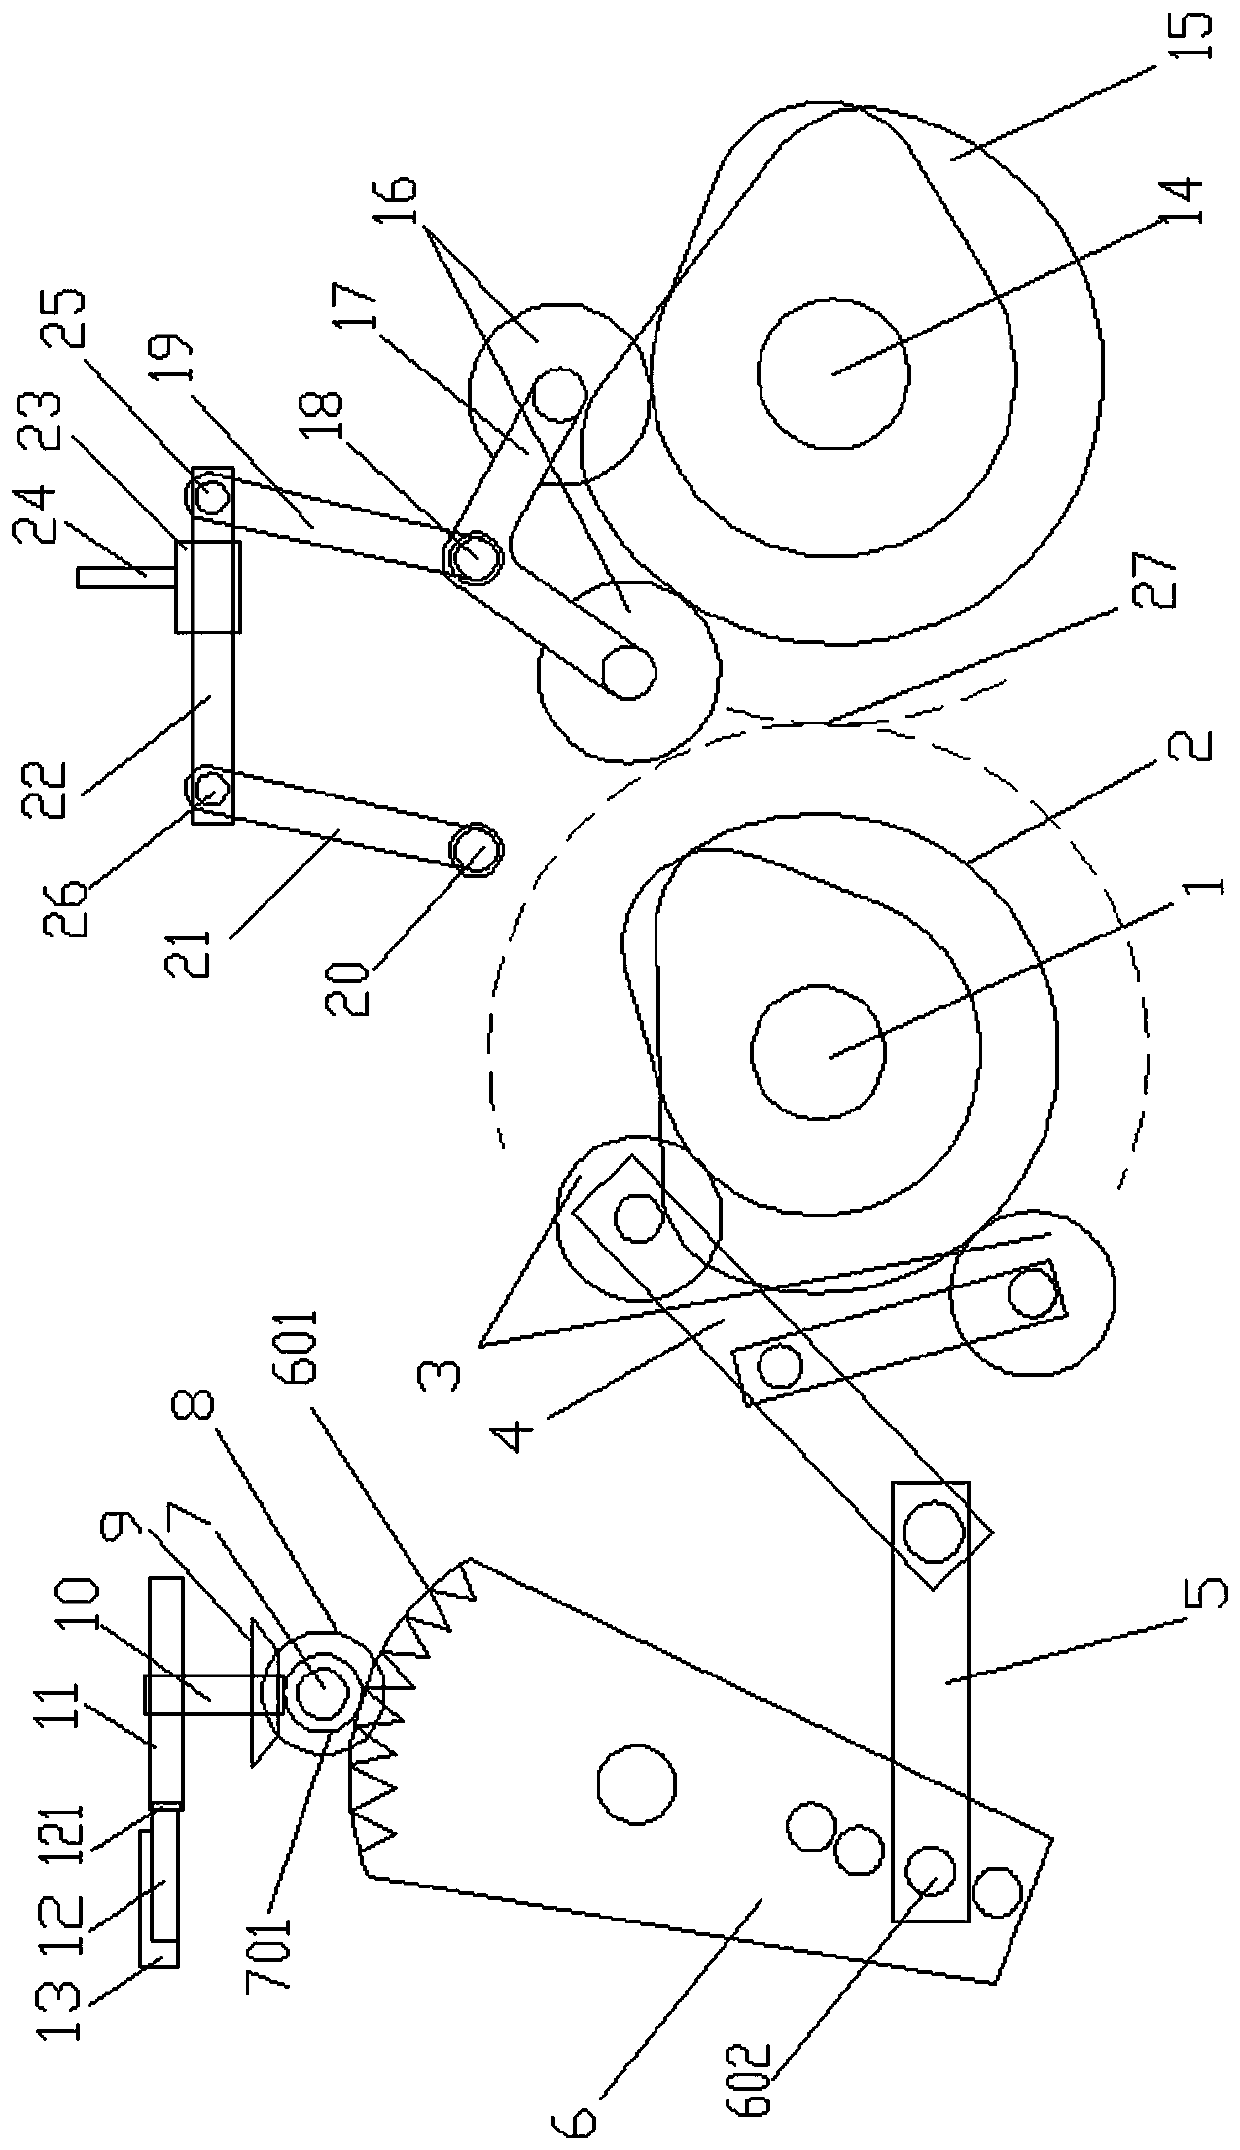 Parallel beating-up and weft insertion mechanism